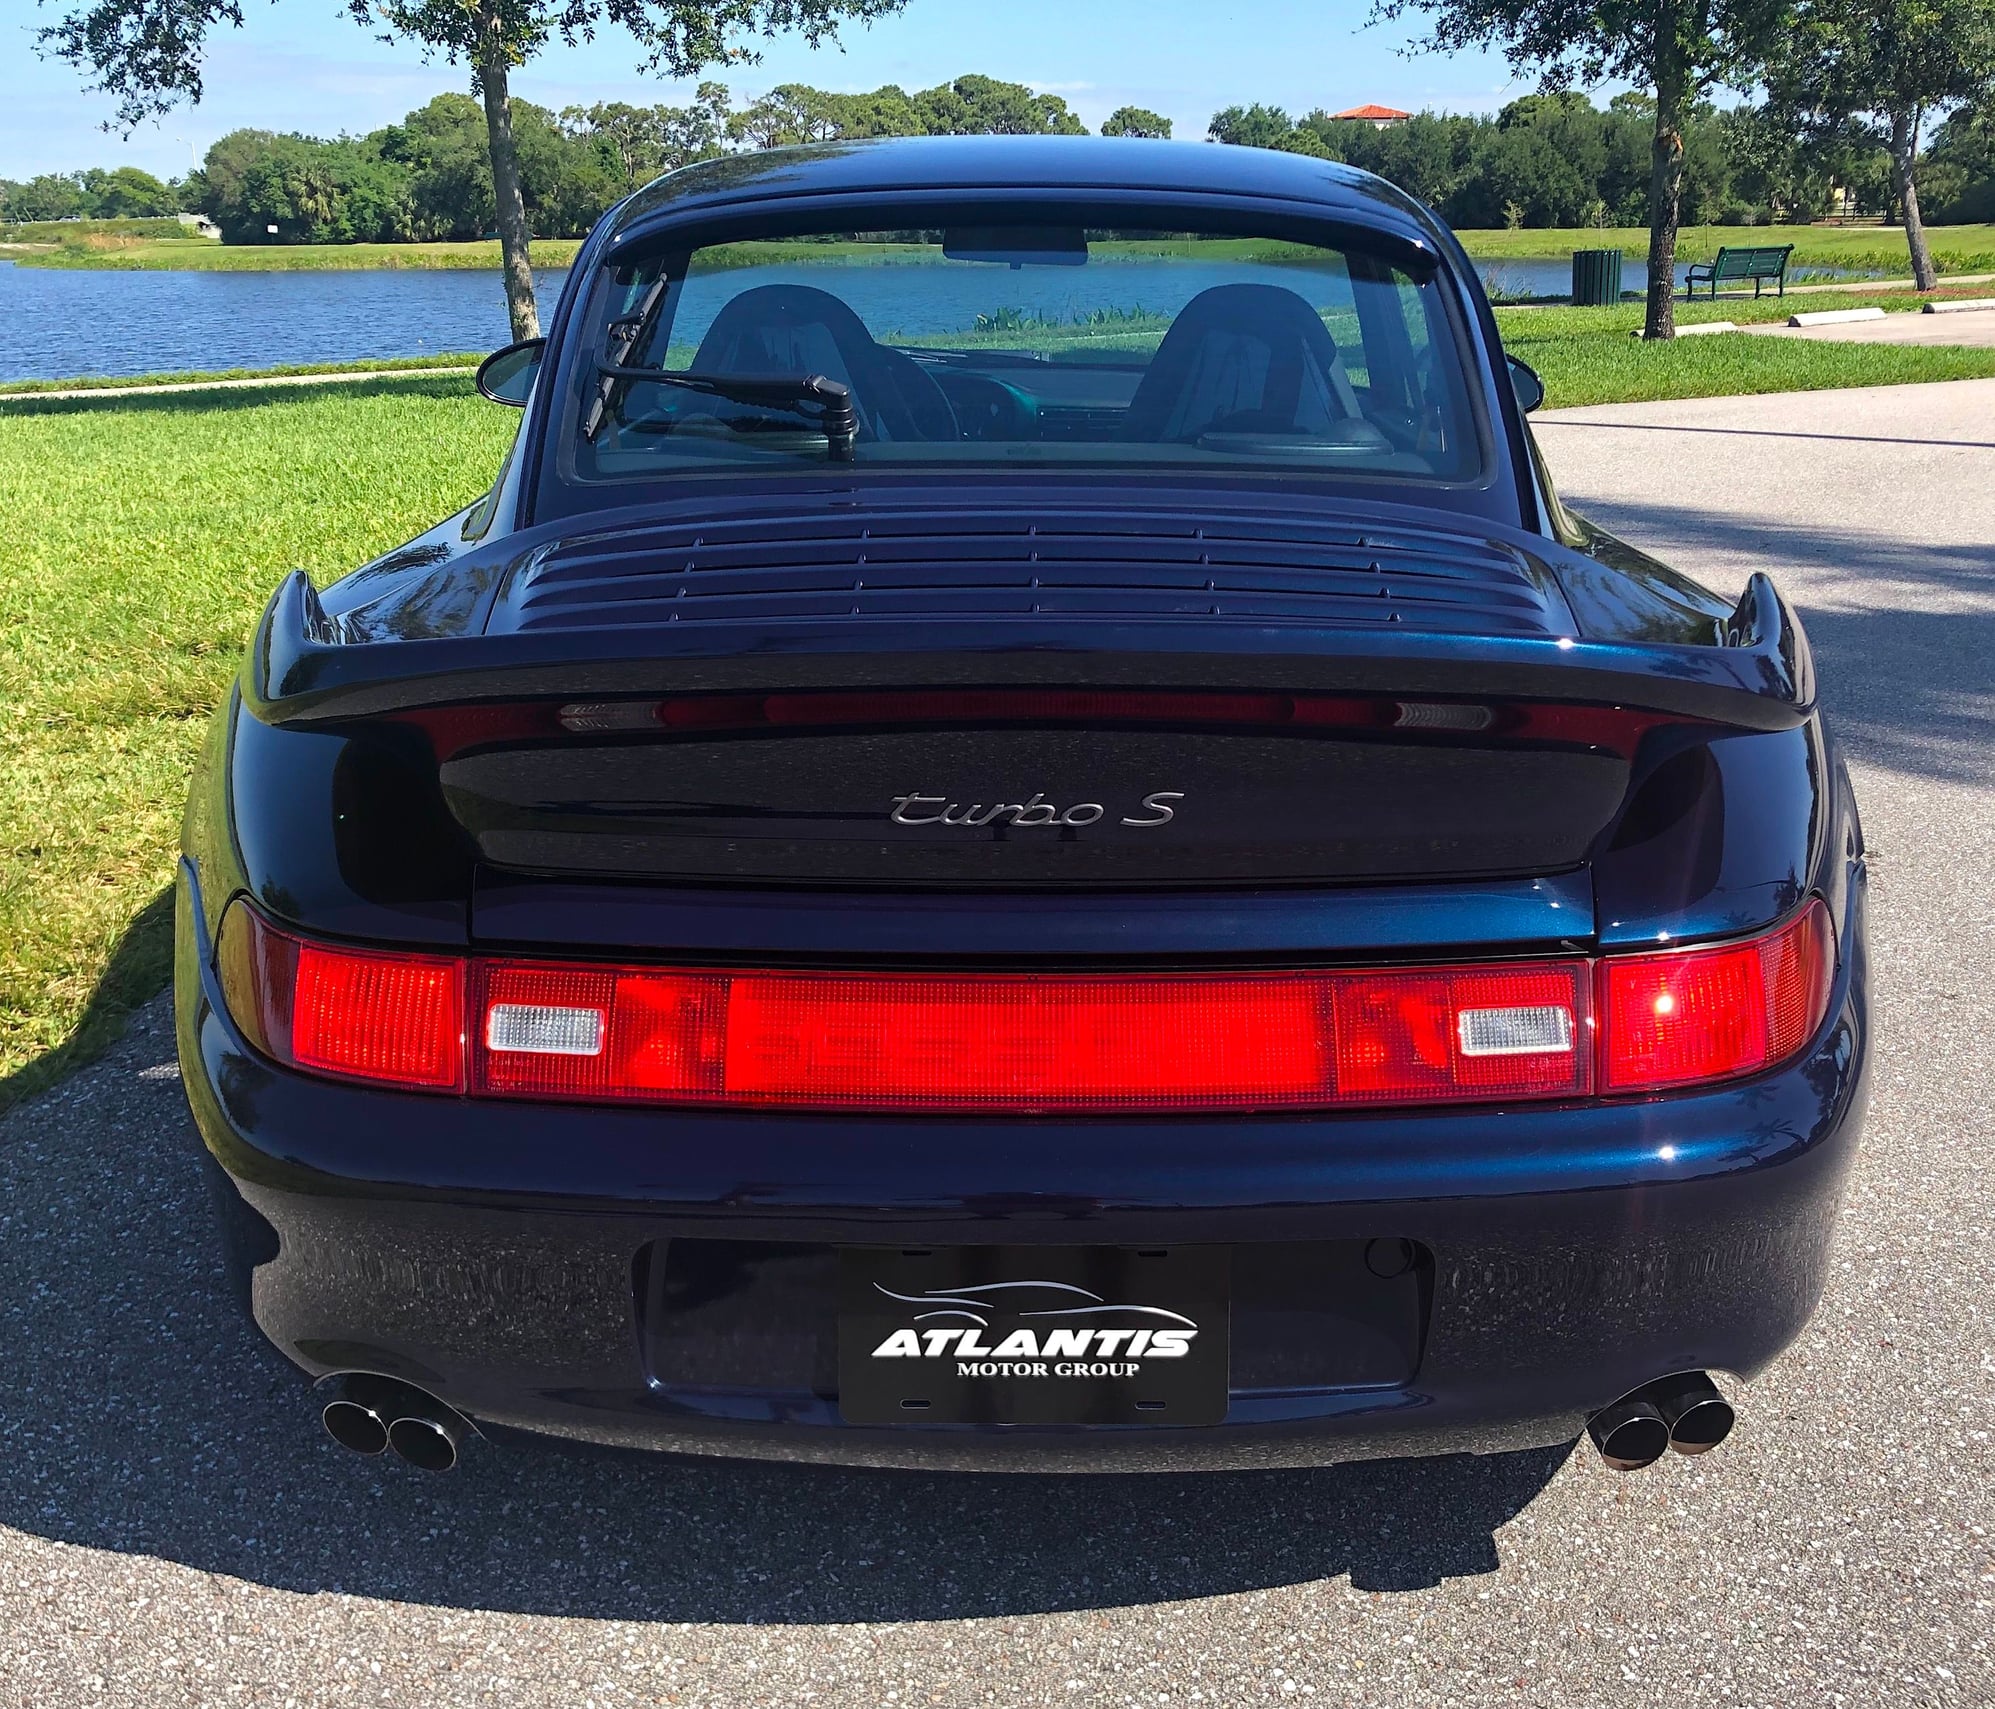 1997 Porsche 911 - For Sale 1997 Porsche Turbo S X50 special wishes, 1 of 2 - Used - VIN WP0ZZZ99ZVS370087 - 14,000 Miles - 6 cyl - 4WD - Manual - Coupe - Blue - Boca Raton, FL 33431, United States